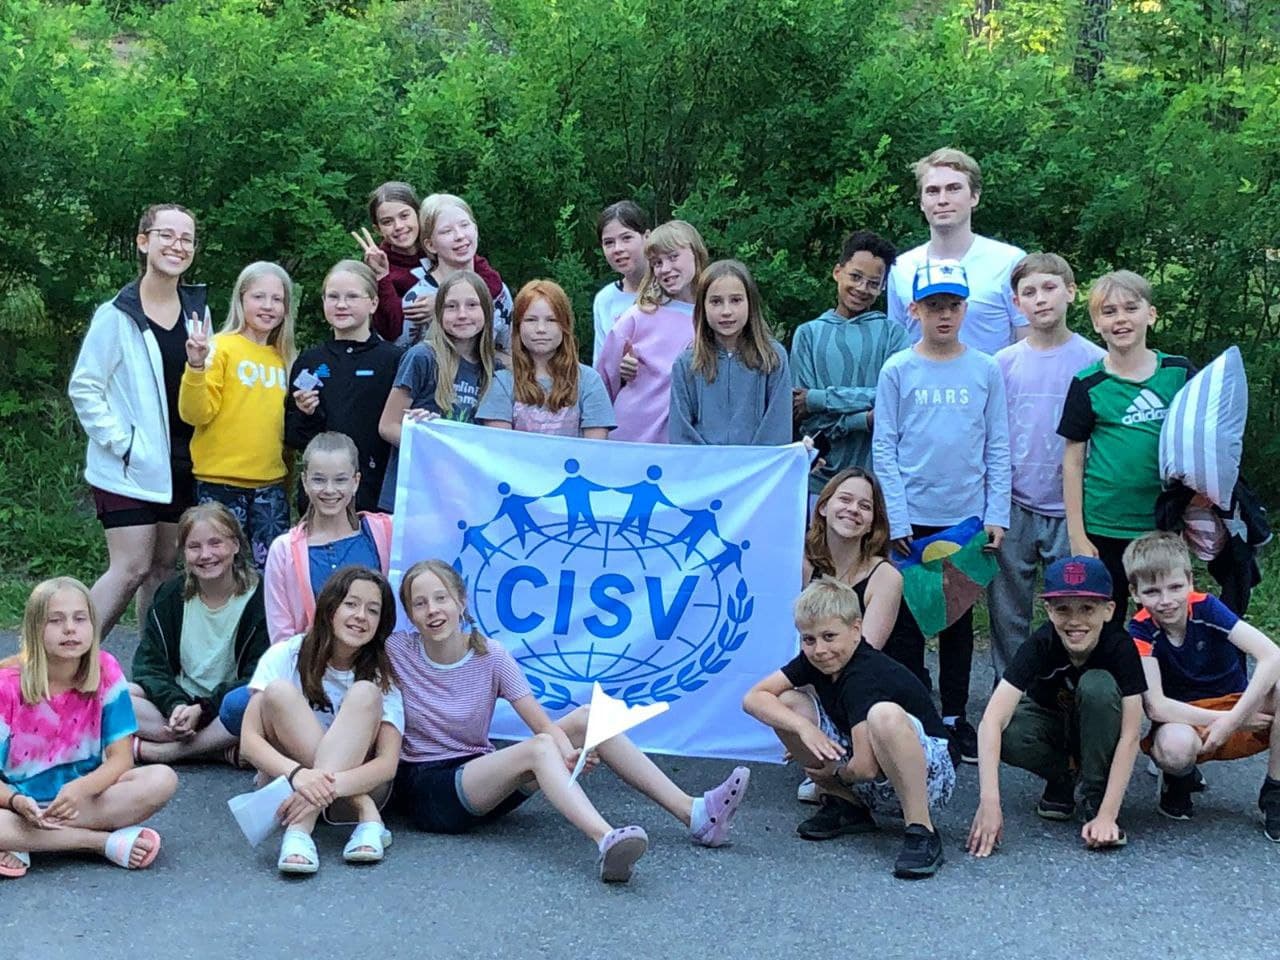 Group of people smiling and holding a CISV-flag